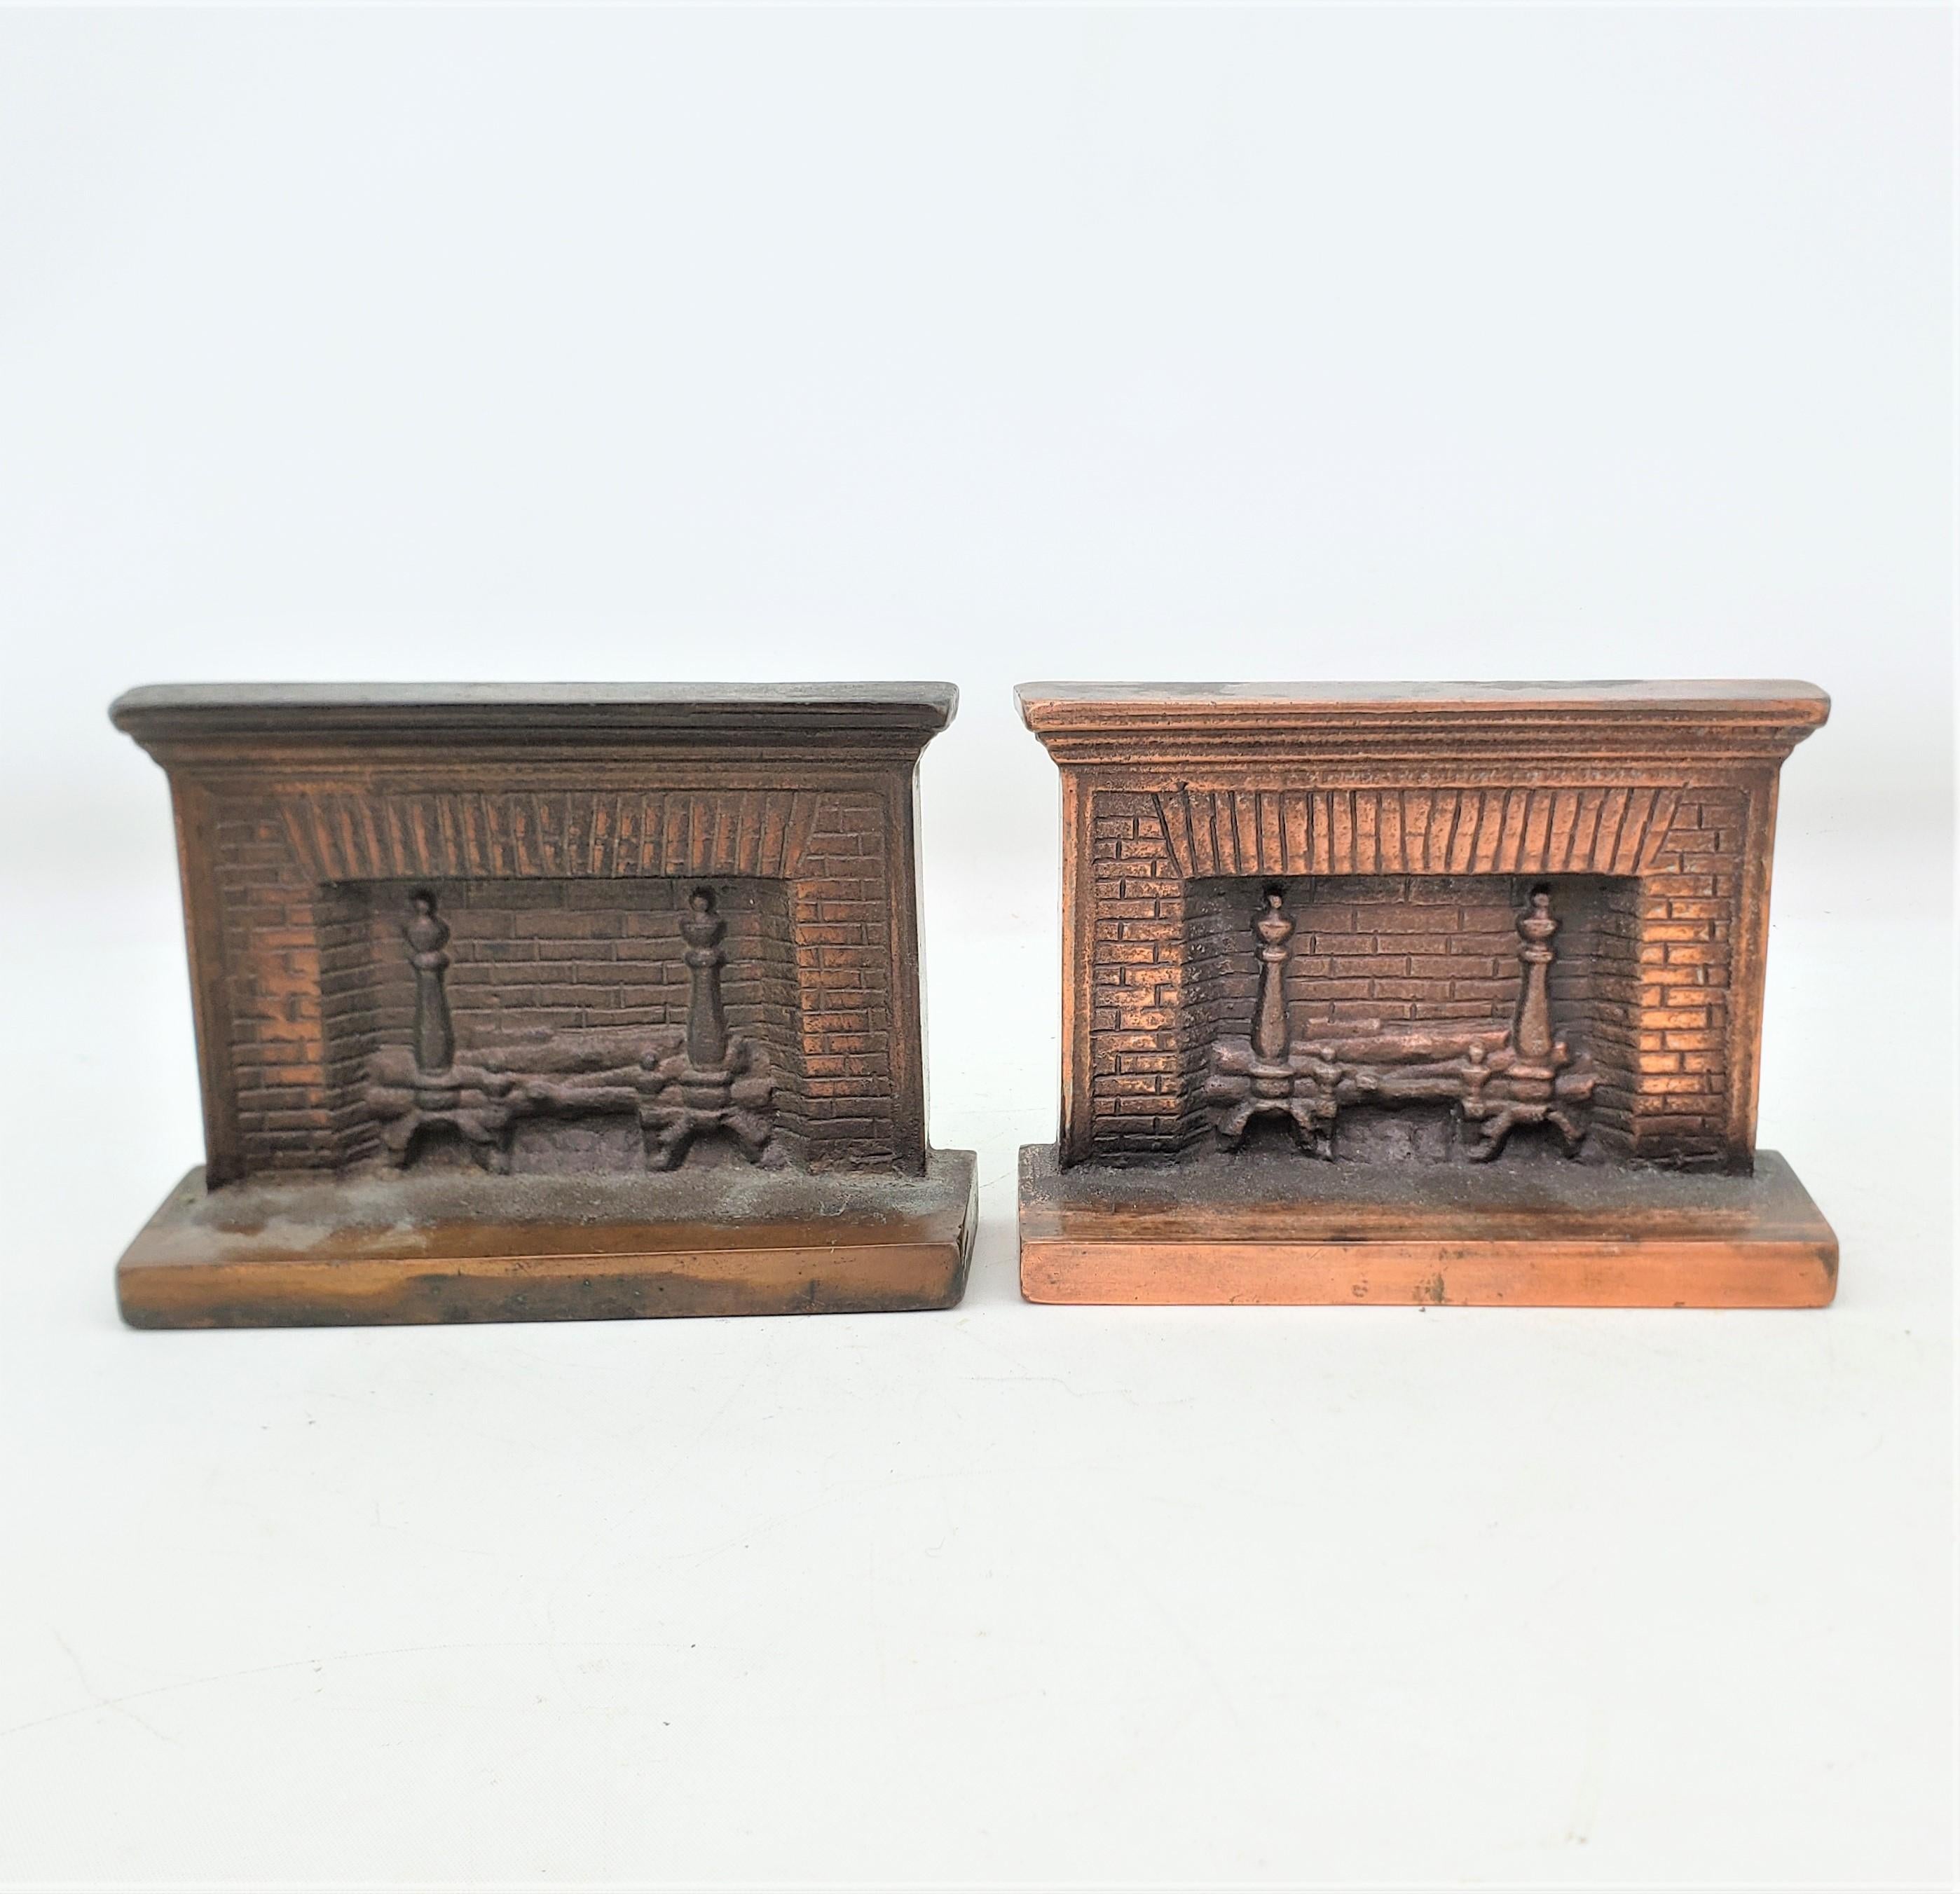 This large and heavy pair of antique bookends are unsigned, but presumed to have originated from the United States and date to approximately 1920 and done in the period Art Deco style. The bookends are composed of cast steel with a bronze patination